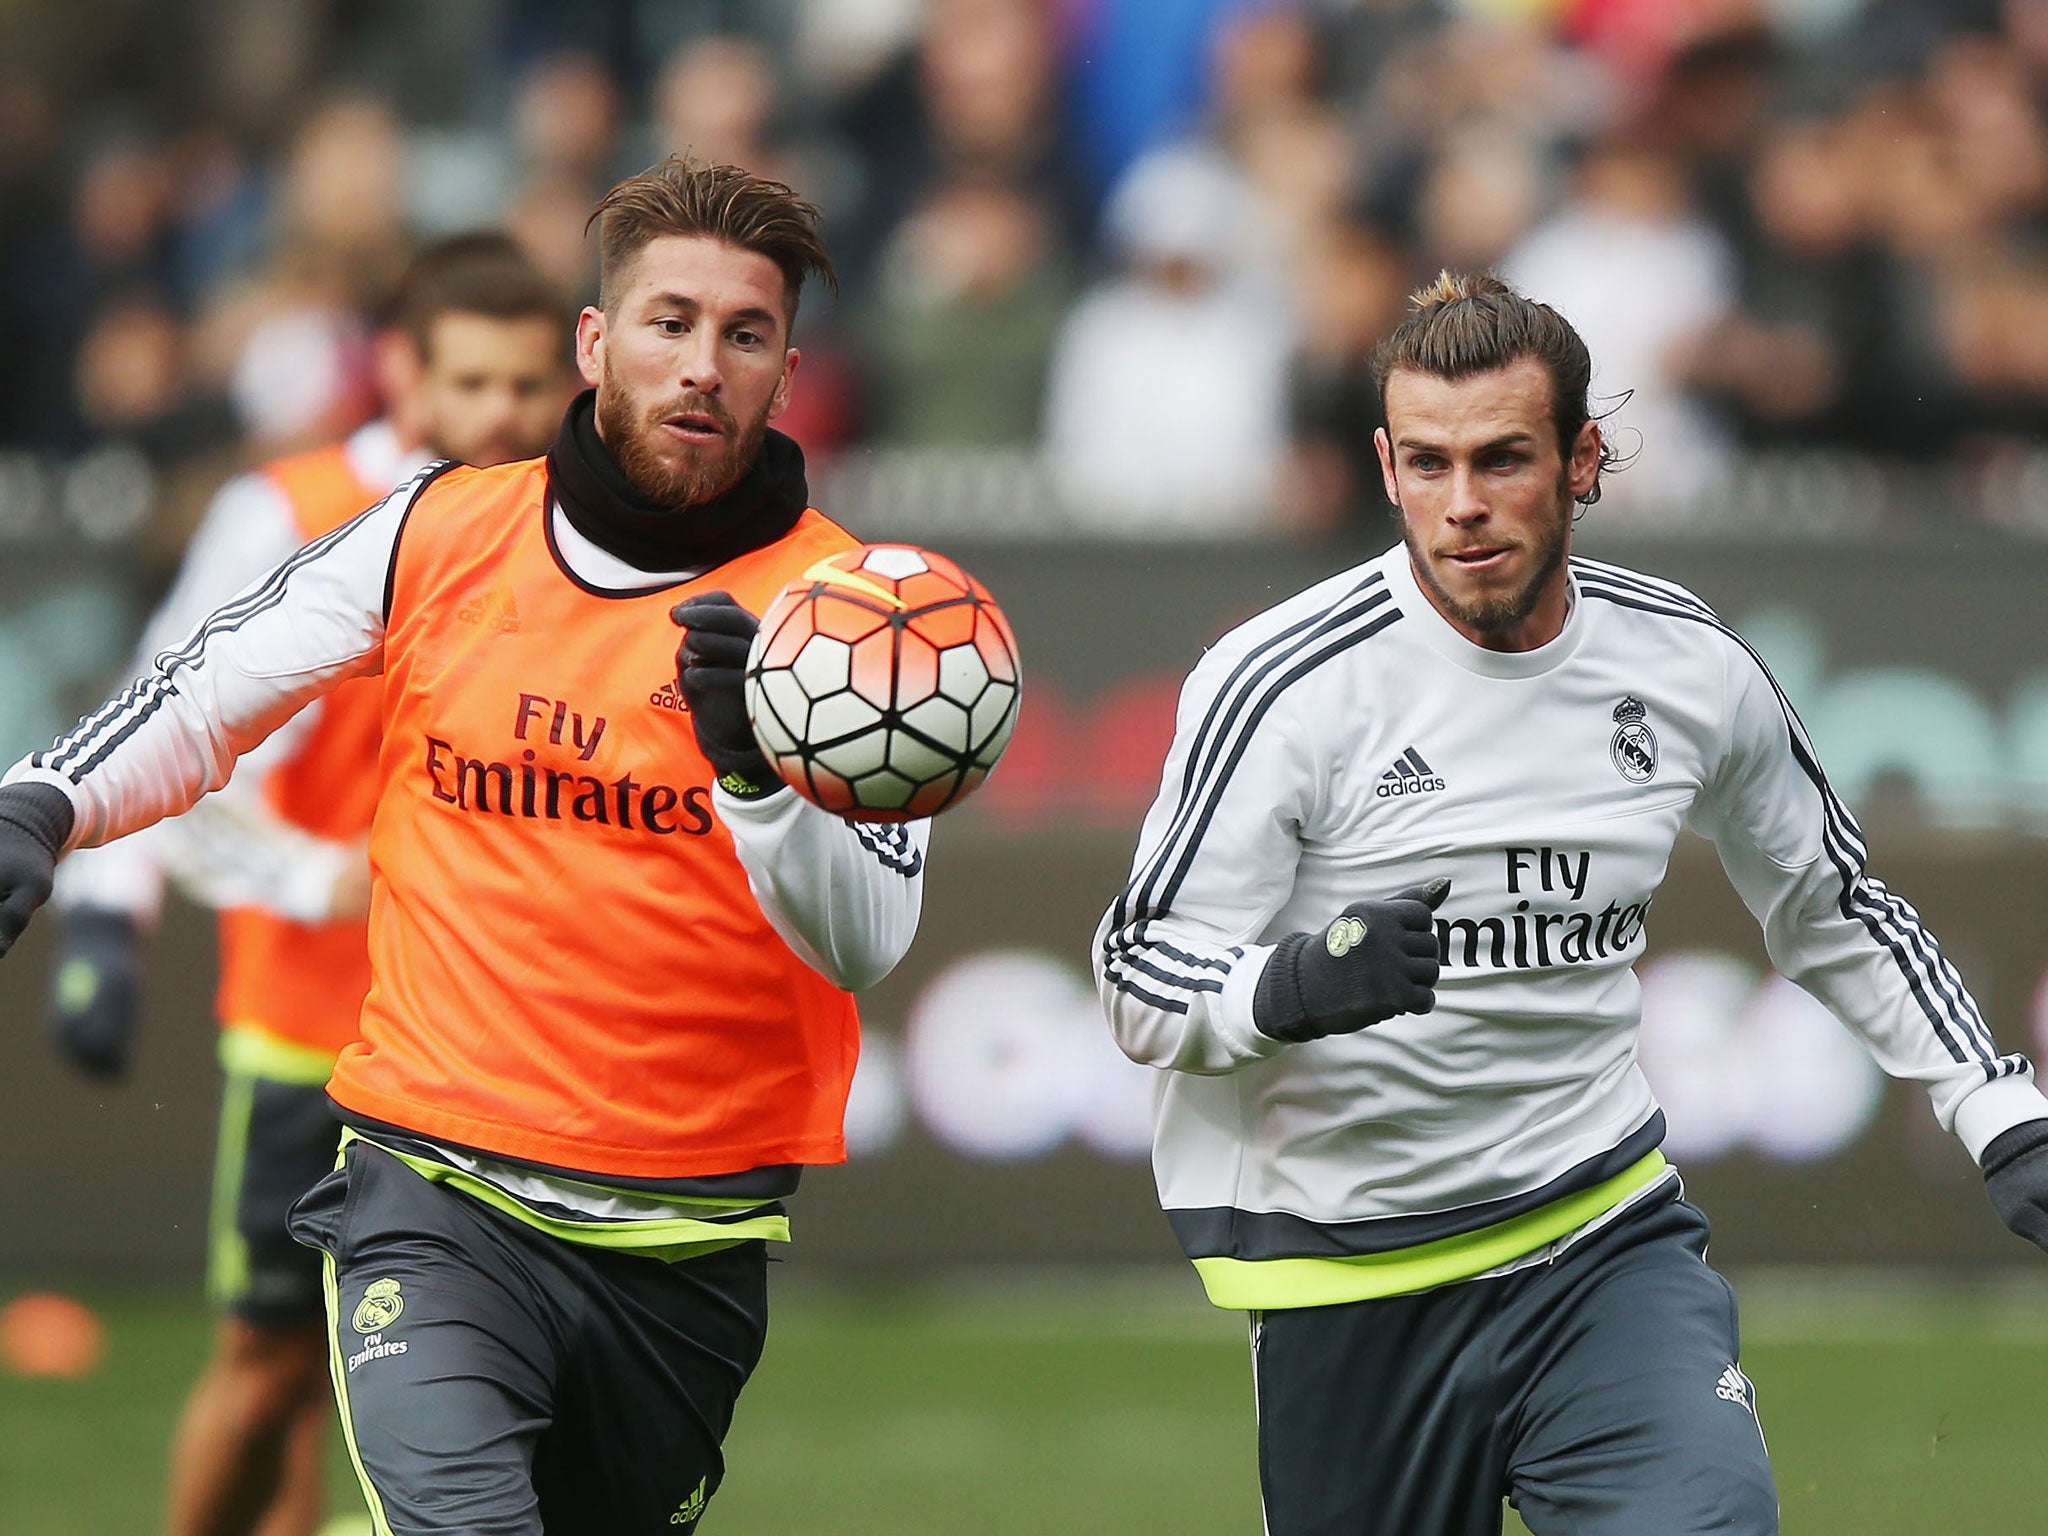 Sergio Ramos and Gareth Bale in training for Real Madrid